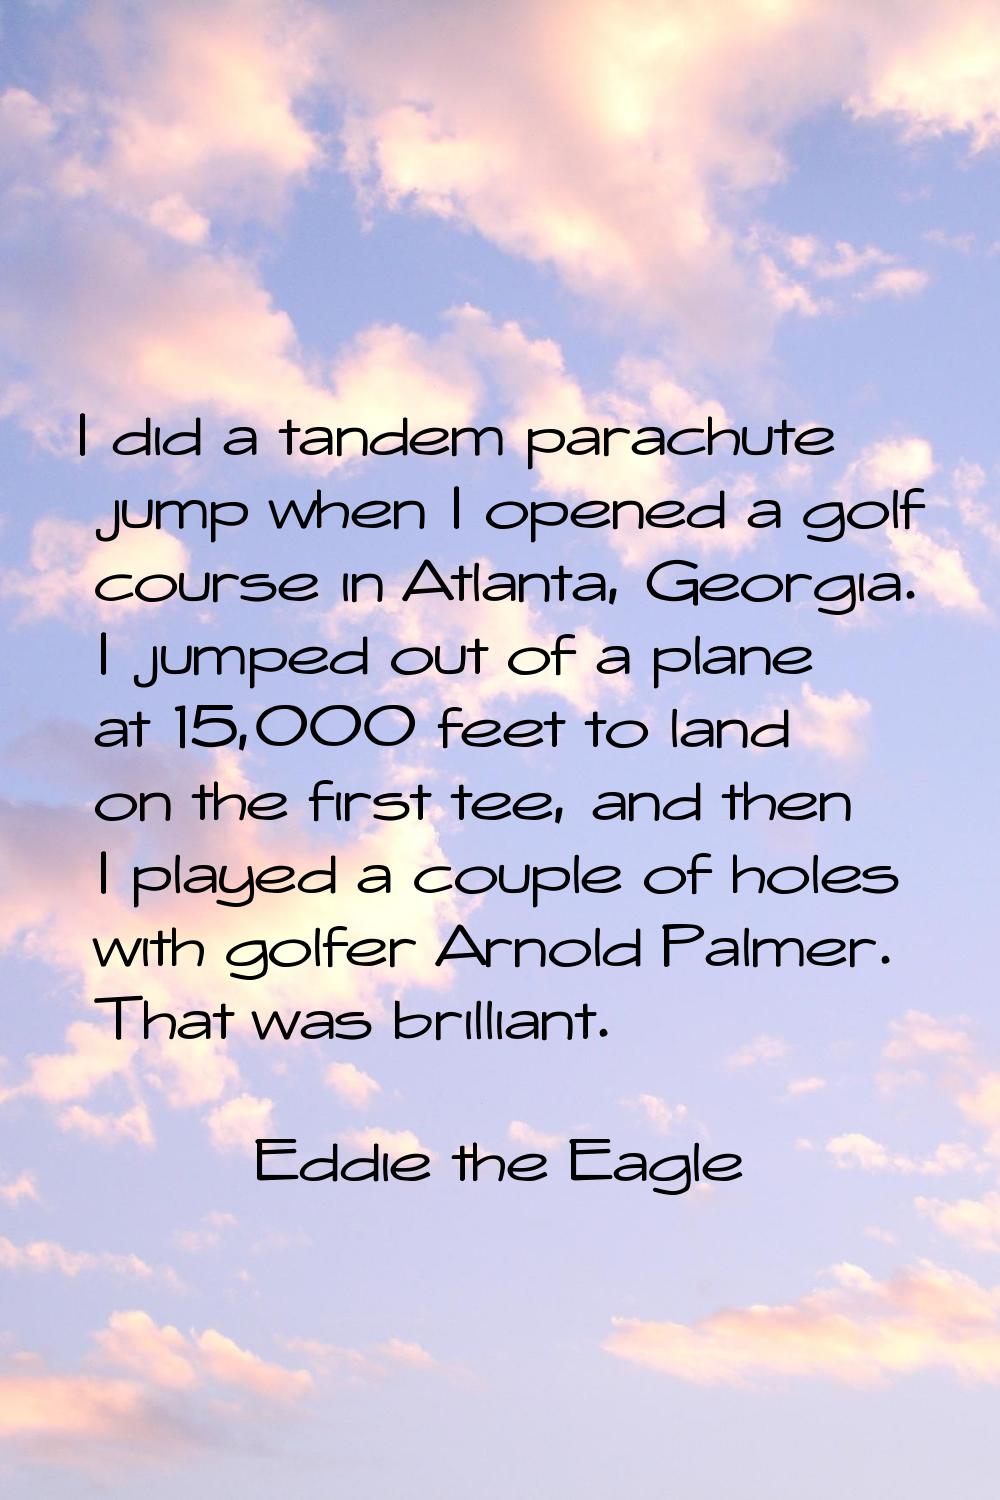 I did a tandem parachute jump when I opened a golf course in Atlanta, Georgia. I jumped out of a pl